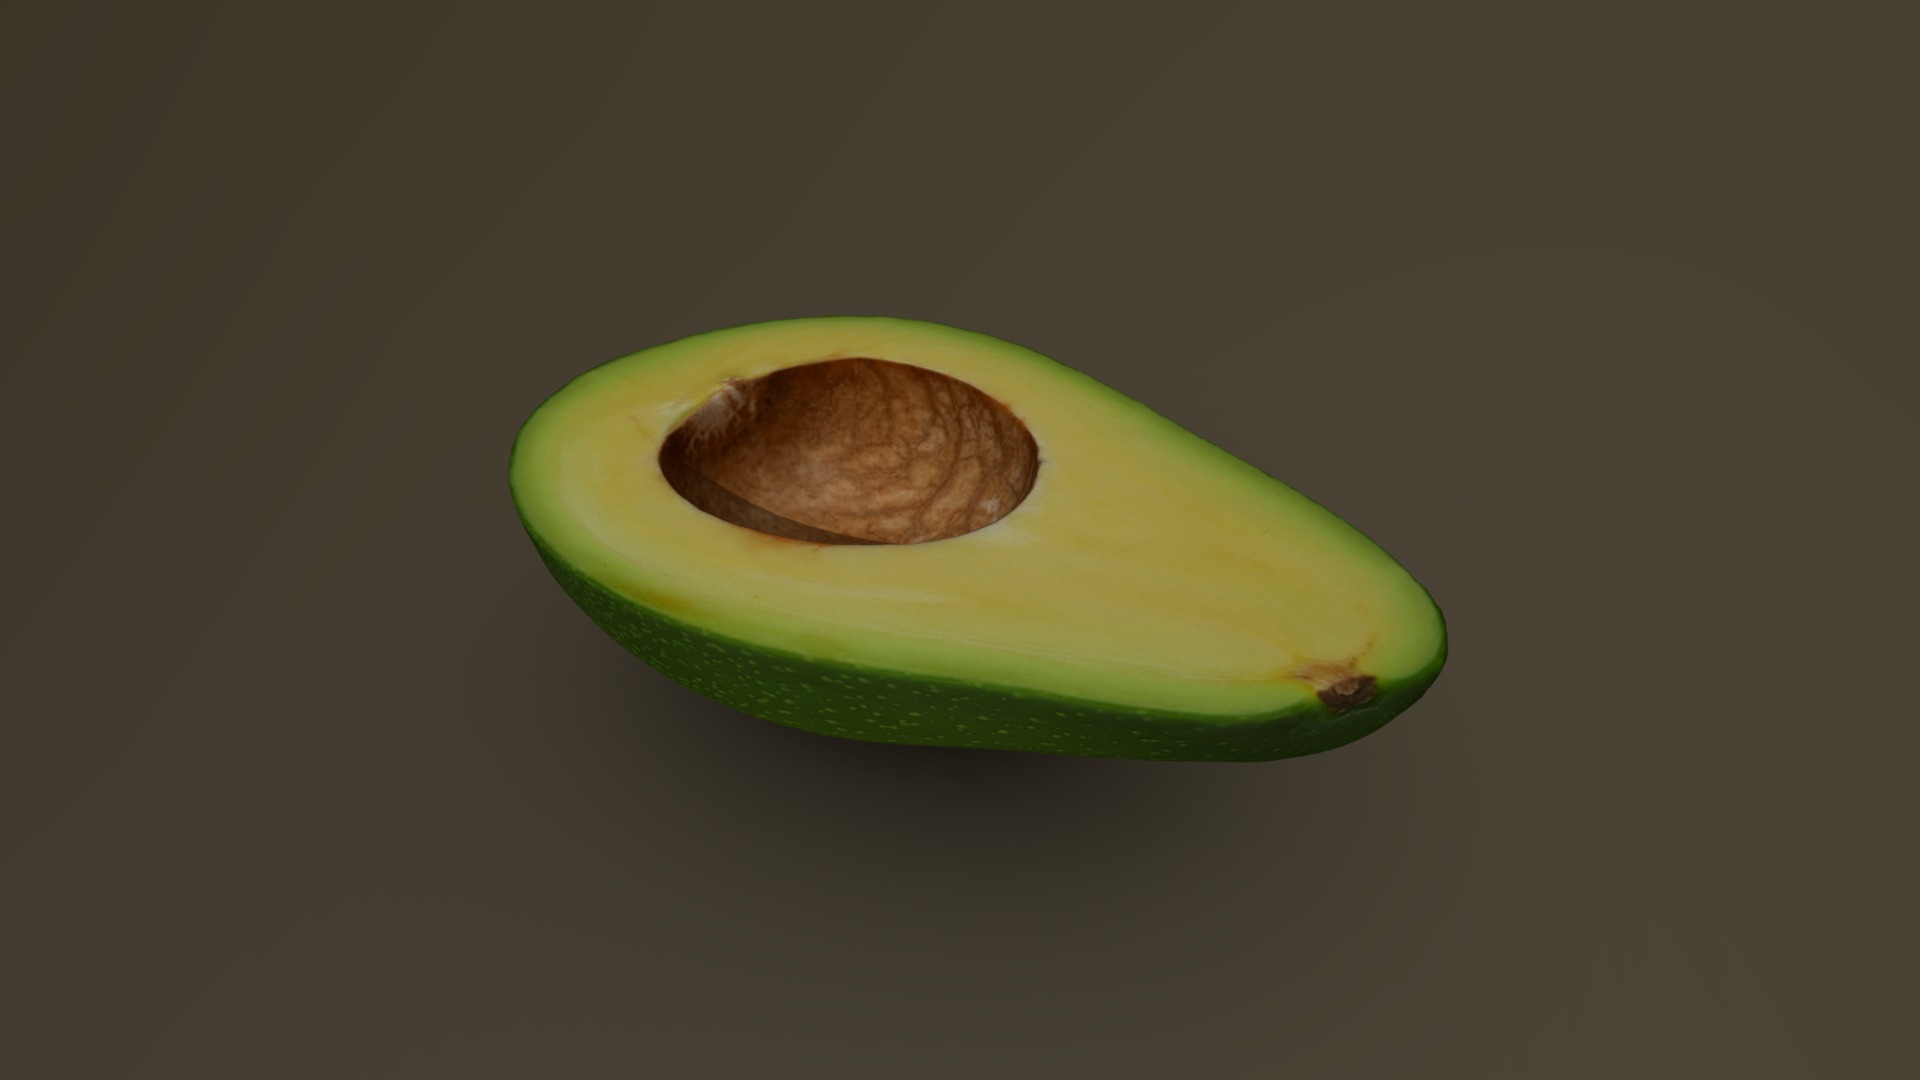 3D model Half Green Avocado without the Pit 09 - This is a 3D model of the Half Green Avocado without the Pit 09. The 3D model is about a half eaten avocado.